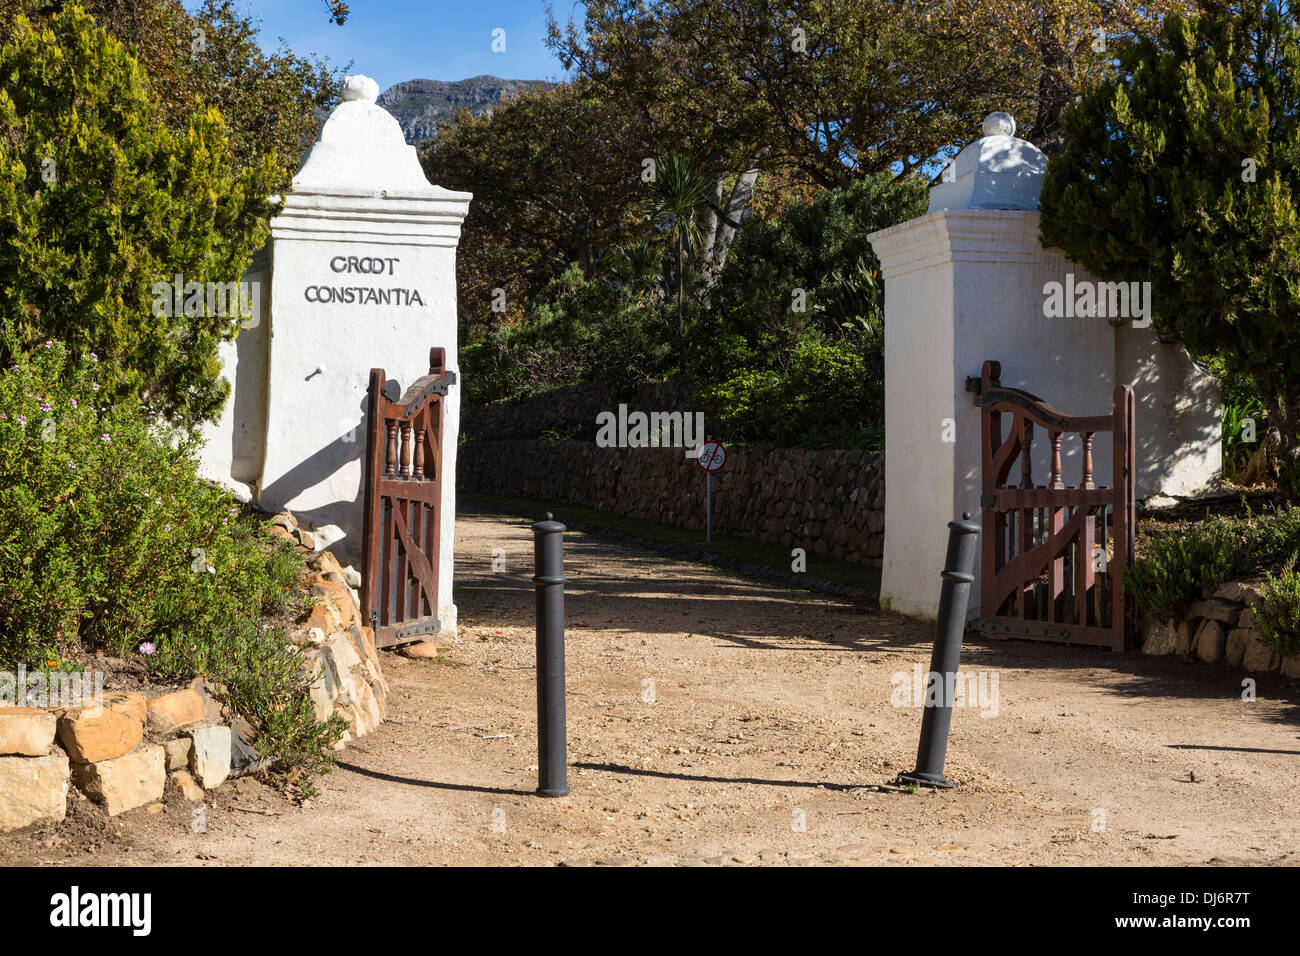 South Africa. Old Entrance gate to Groot Constantia, oldest wine estate in South Africa, founded 1685. Stock Photo